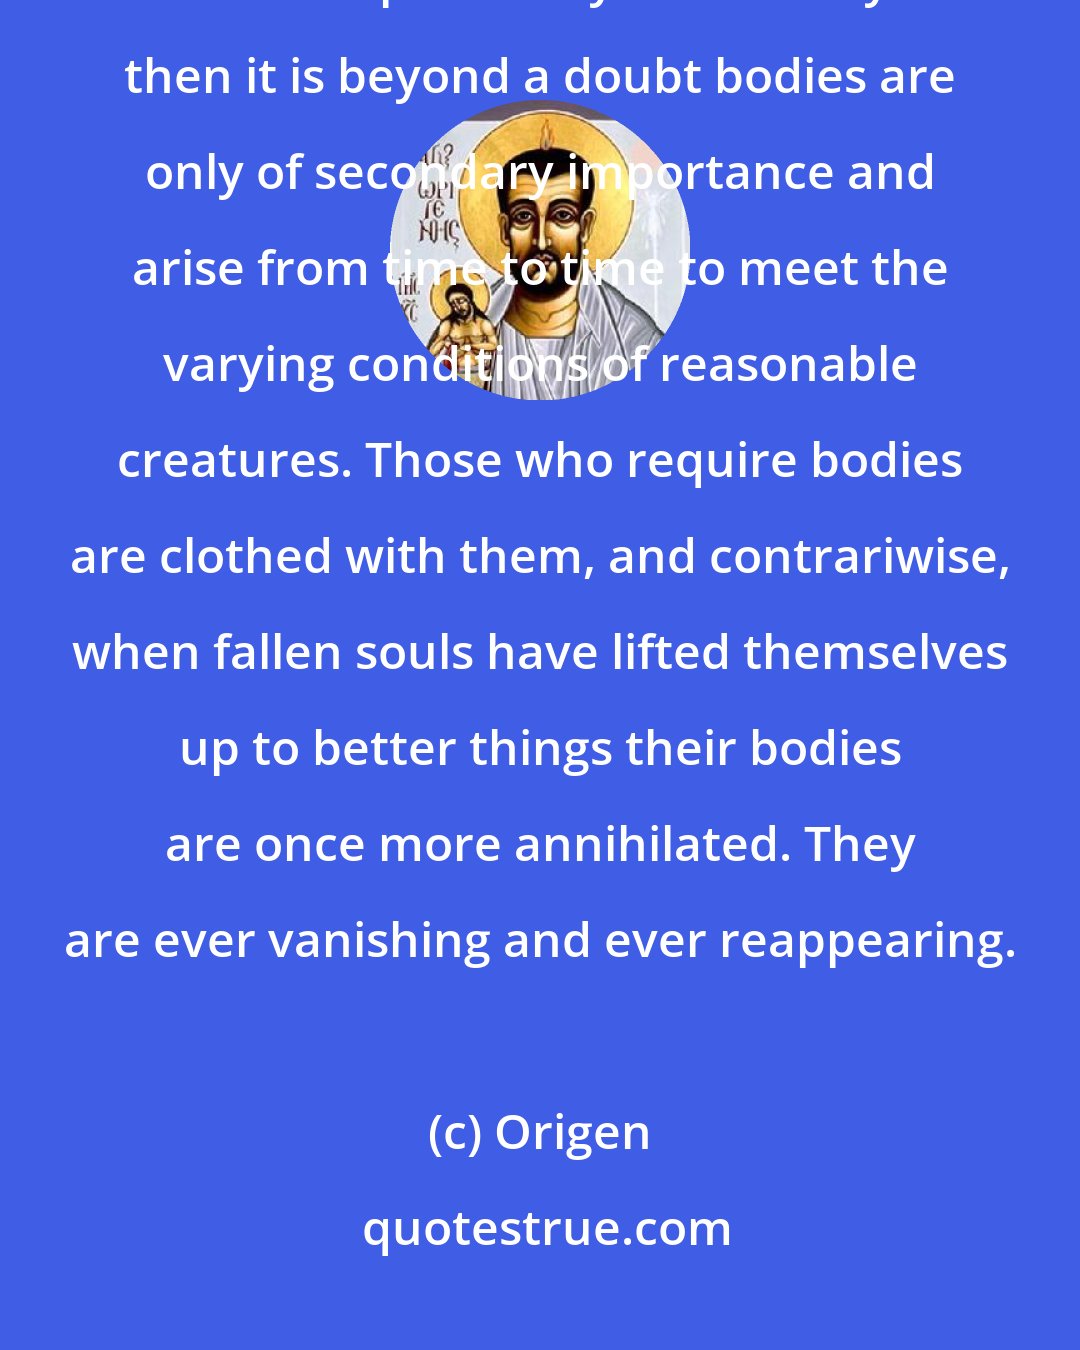 Origen: It can be shown that an incorporeal and reasonable being has life in itself independently of the body... then it is beyond a doubt bodies are only of secondary importance and arise from time to time to meet the varying conditions of reasonable creatures. Those who require bodies are clothed with them, and contrariwise, when fallen souls have lifted themselves up to better things their bodies are once more annihilated. They are ever vanishing and ever reappearing.